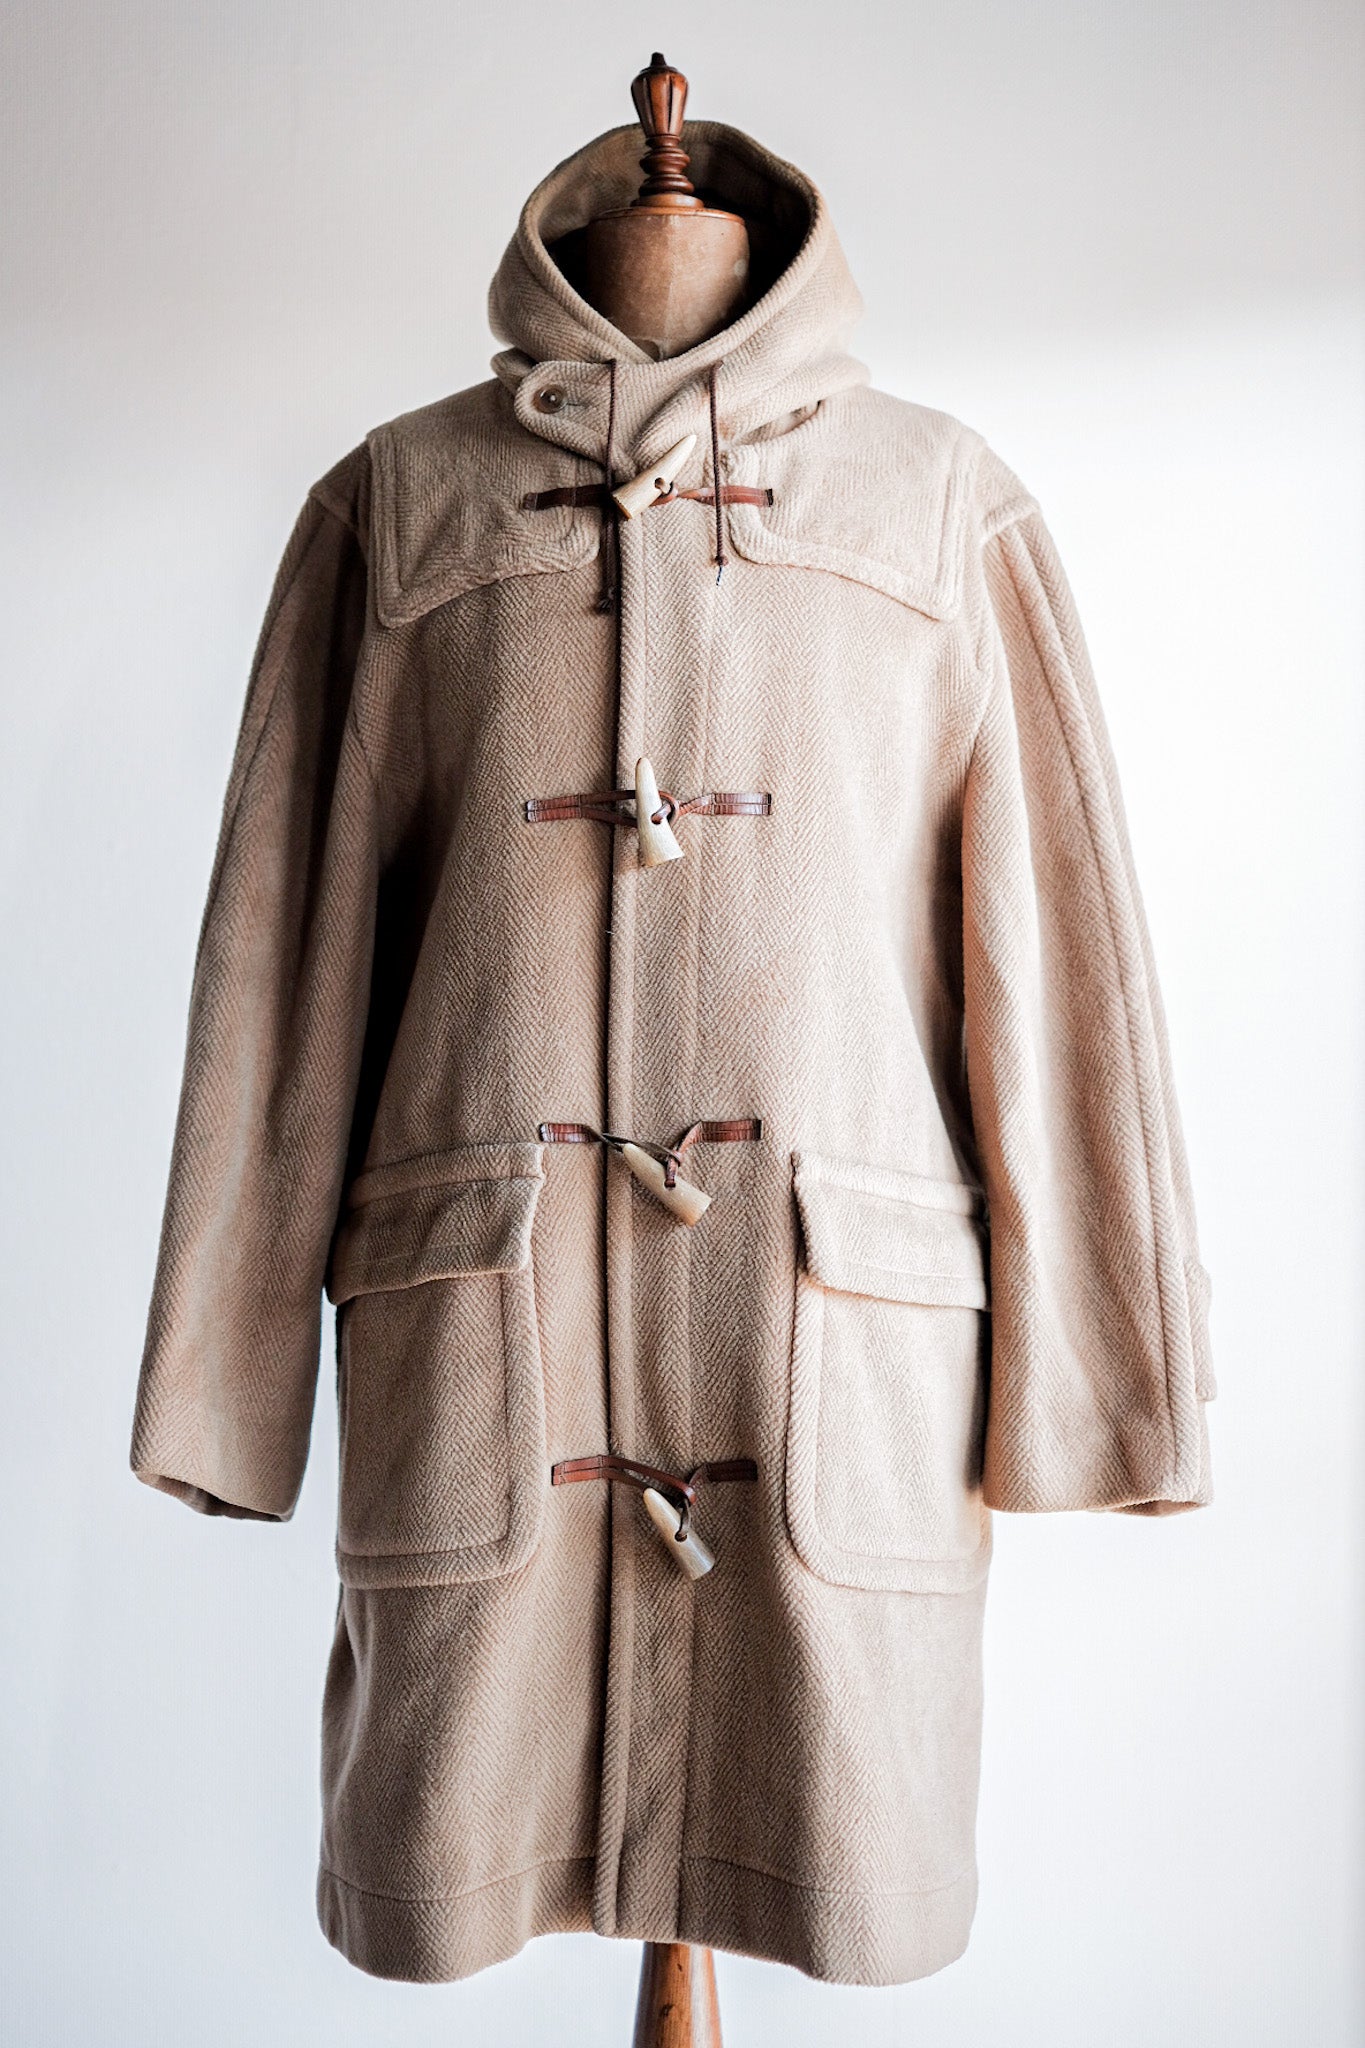 【~80's】Old England Wool Duffle Coat Made by INVERTERE